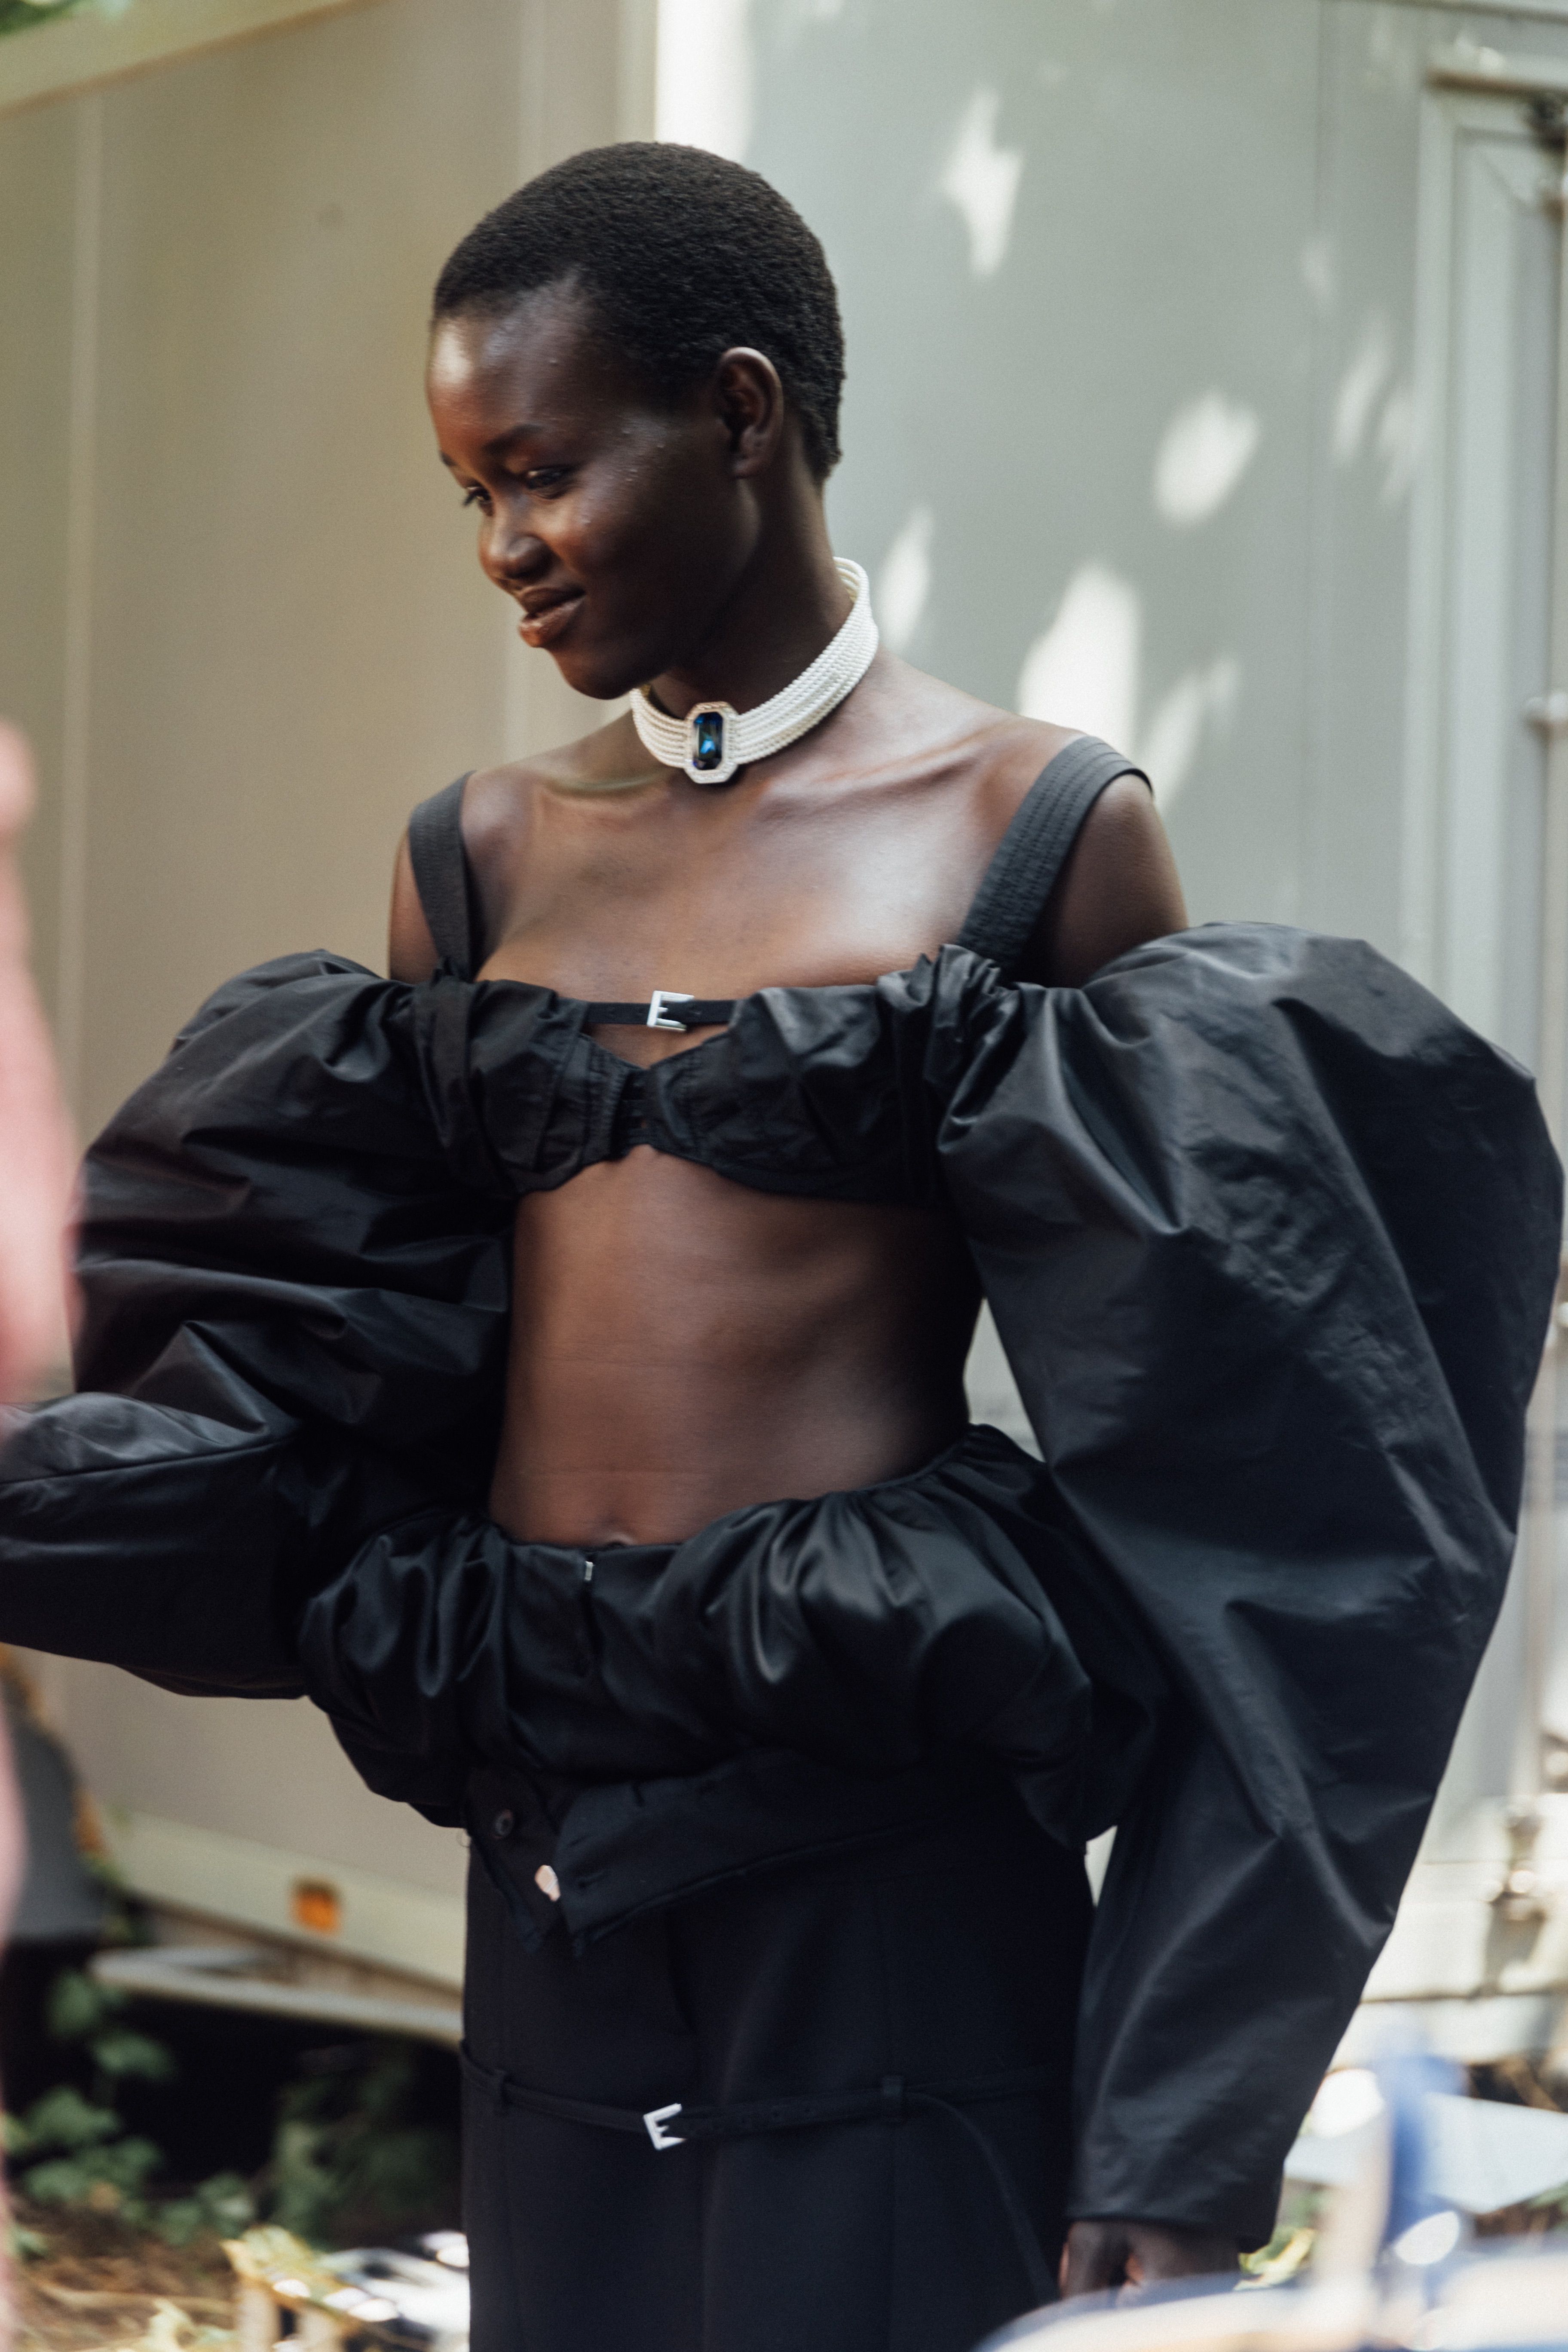 Wildest Looks From Jacquemus' Runway Show Inspired by Princess Diana